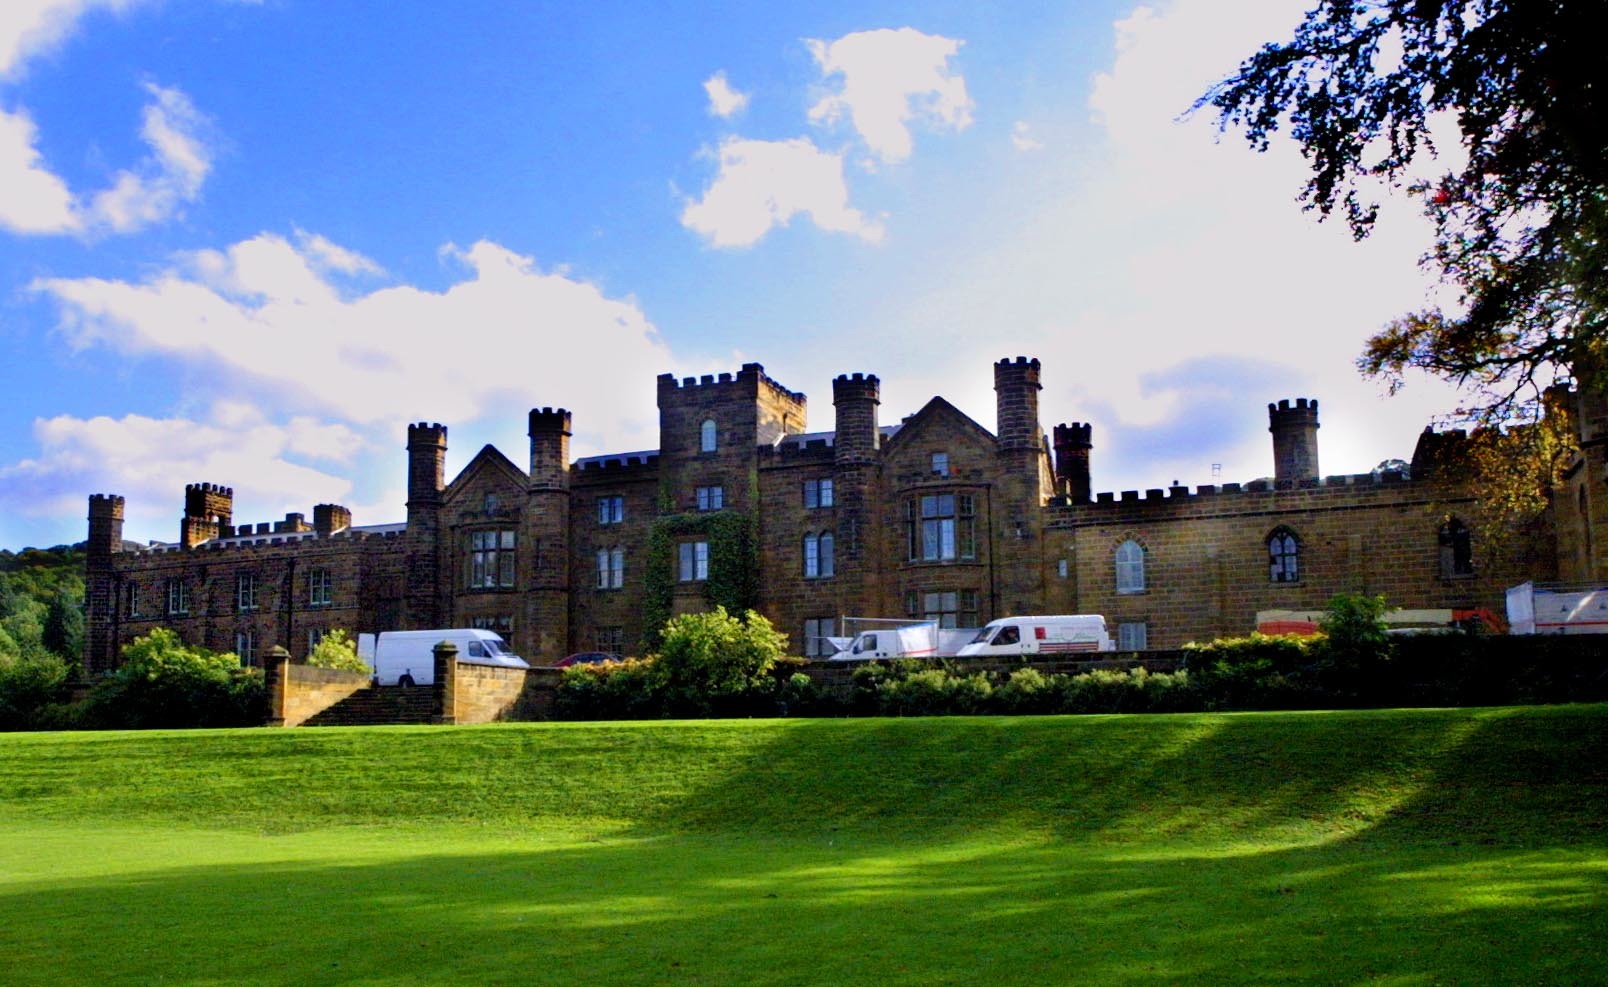 Wilton Castle, the home of James Lowther